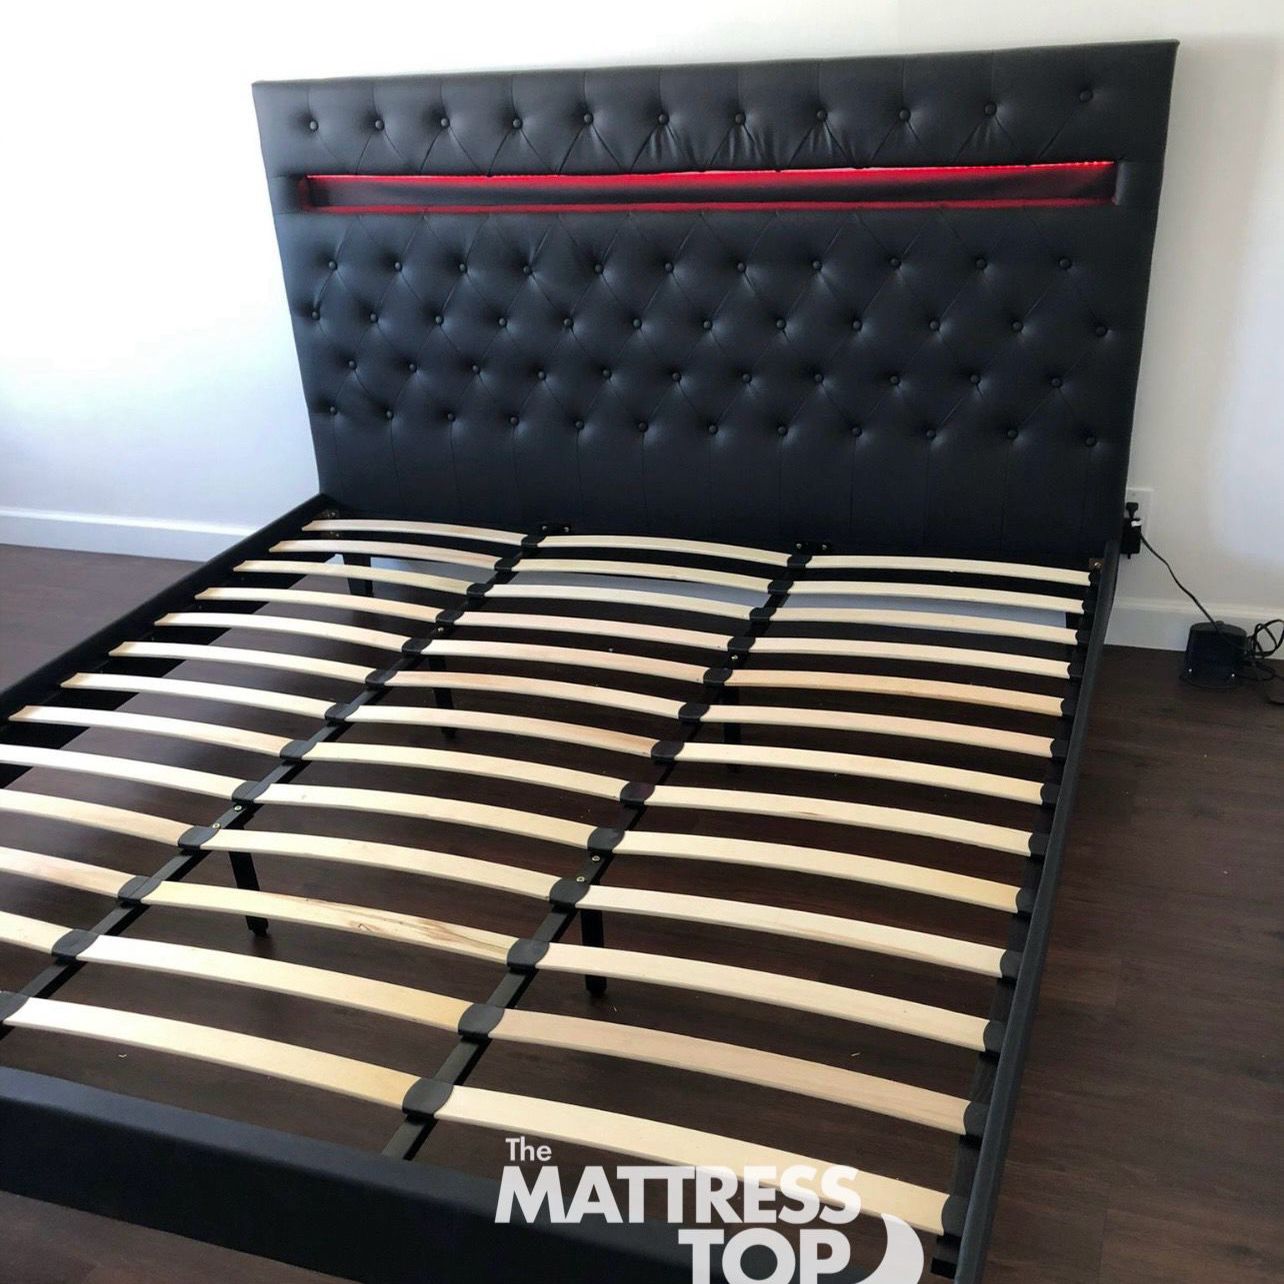 Cama Queen Bed Frame Black LED ( Only 10 Down)